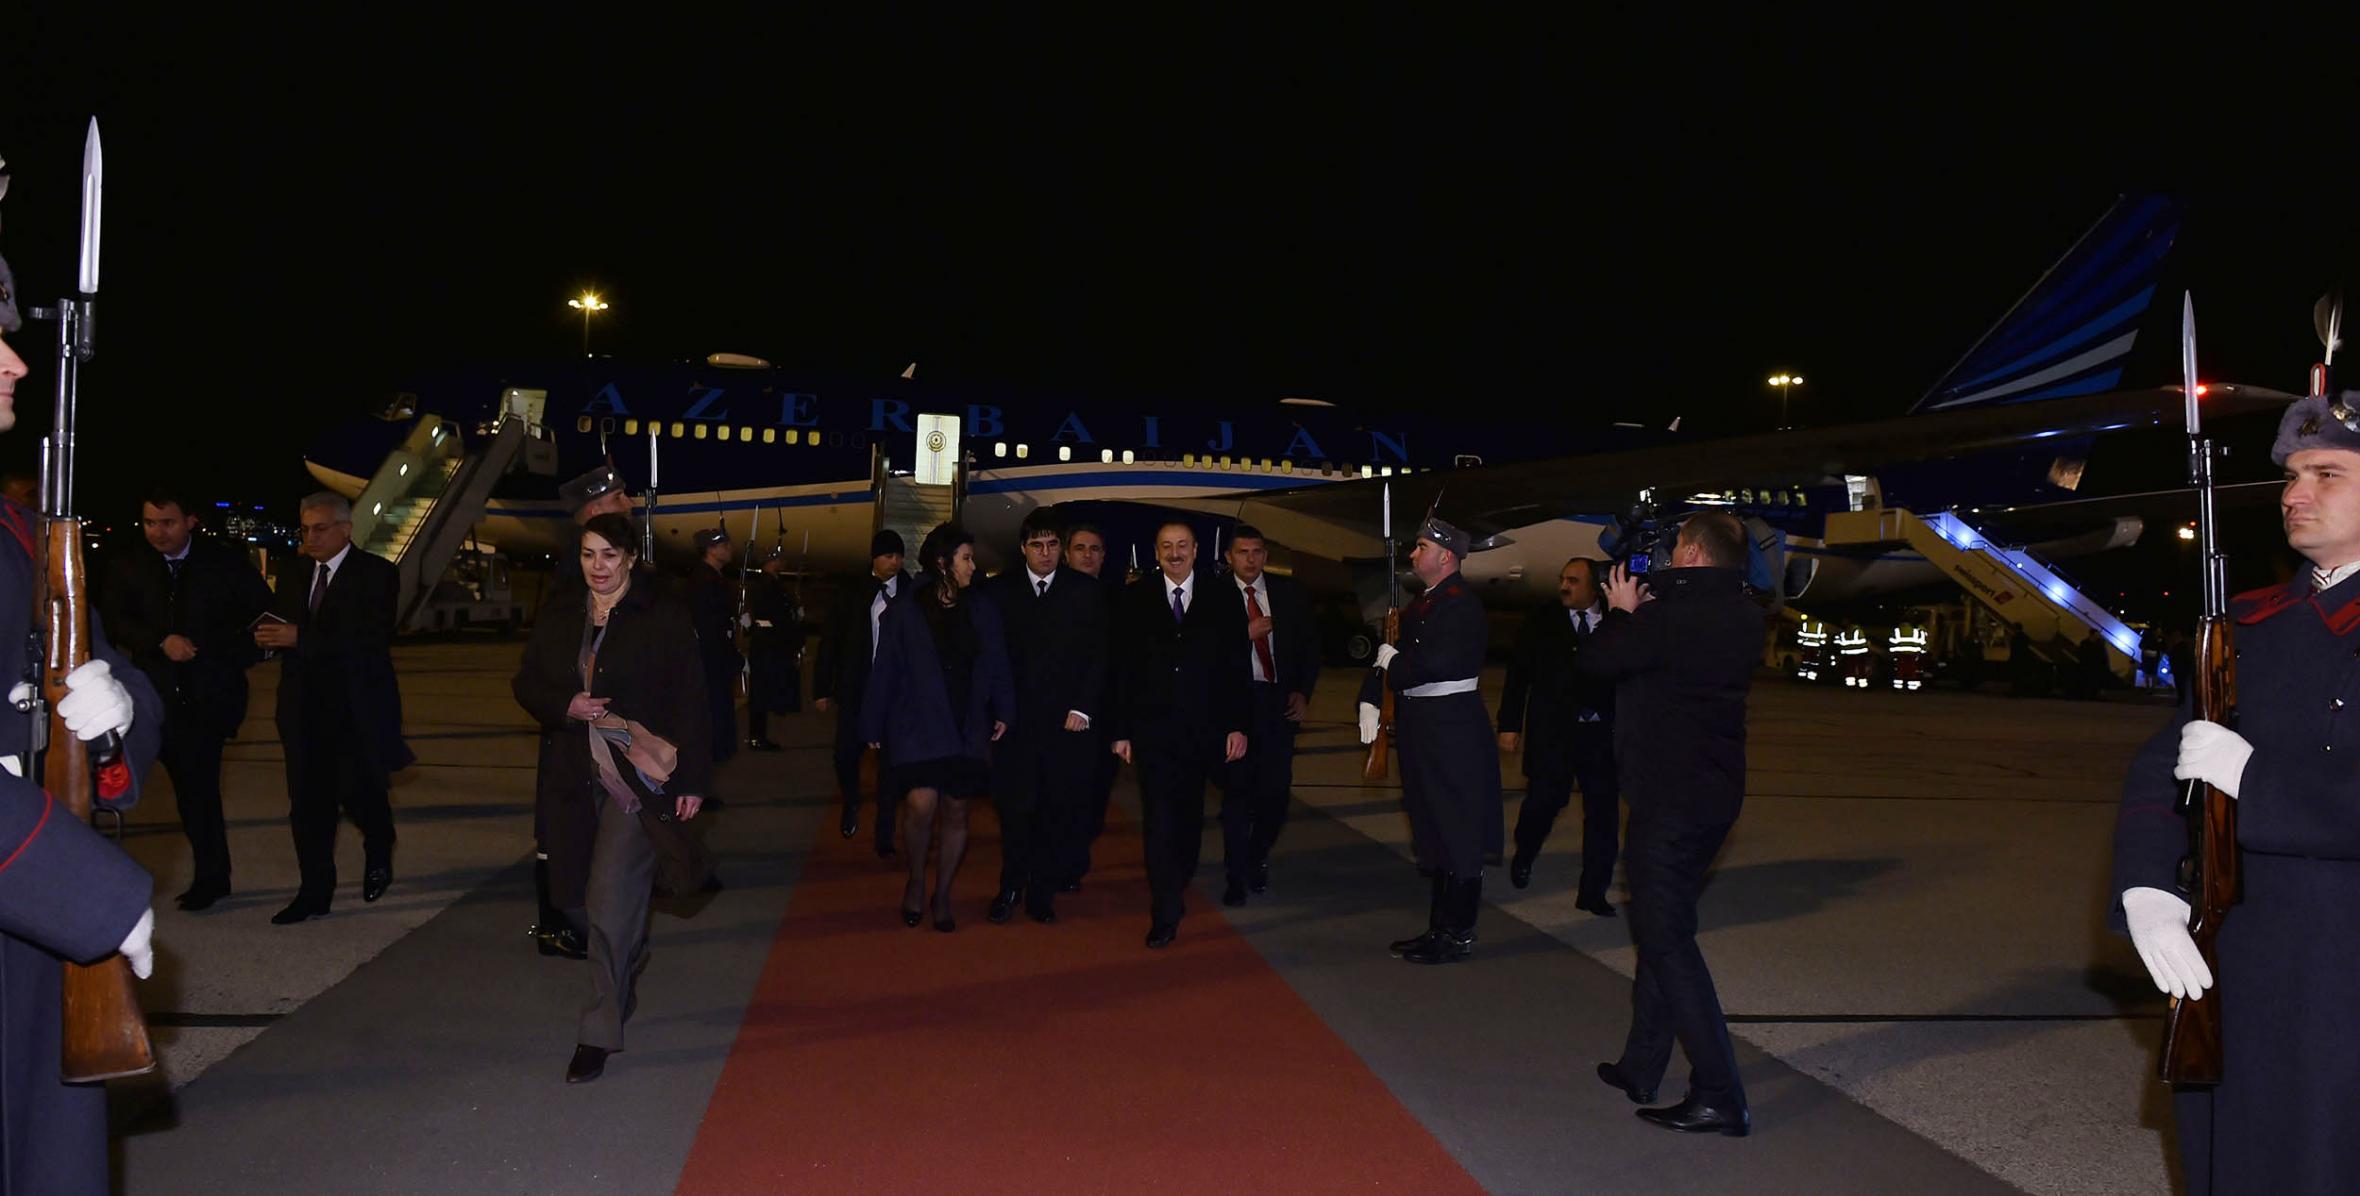 Ilham Aliyev arrived in Bulgaria on an official visit